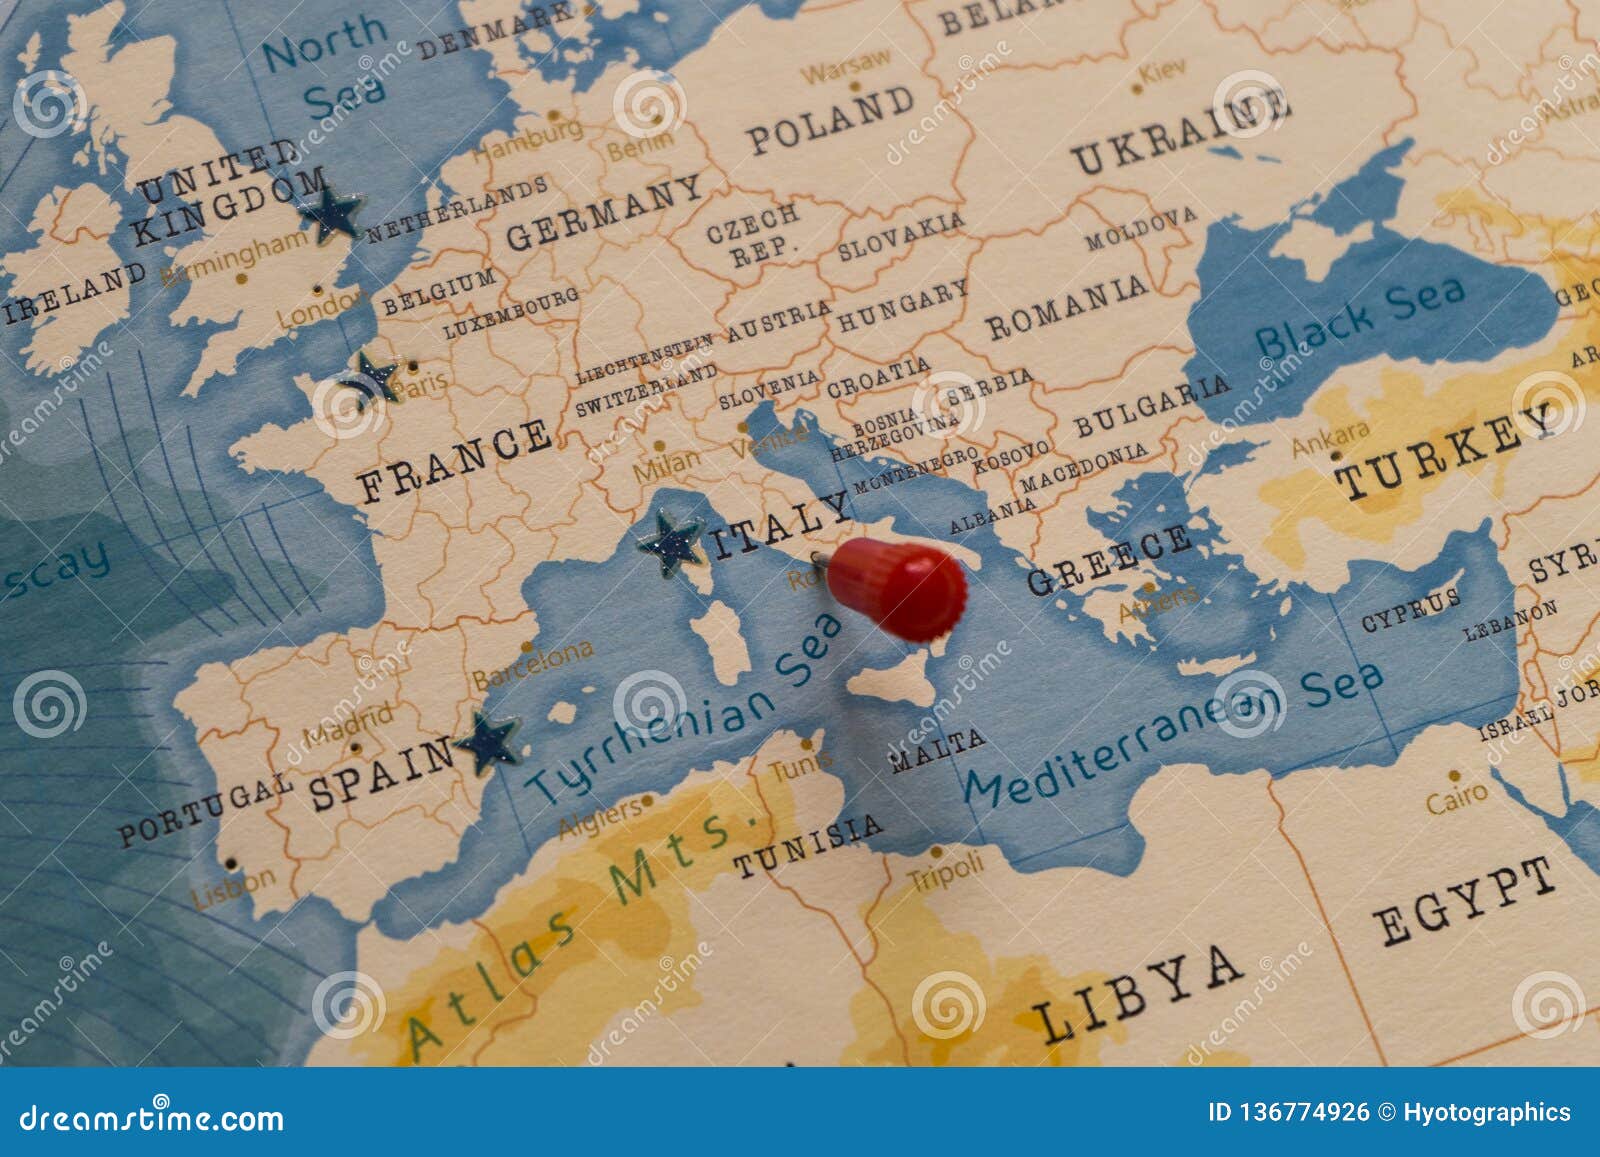 A Pin On Rome Italy In The World Map Stock Photo Image Of